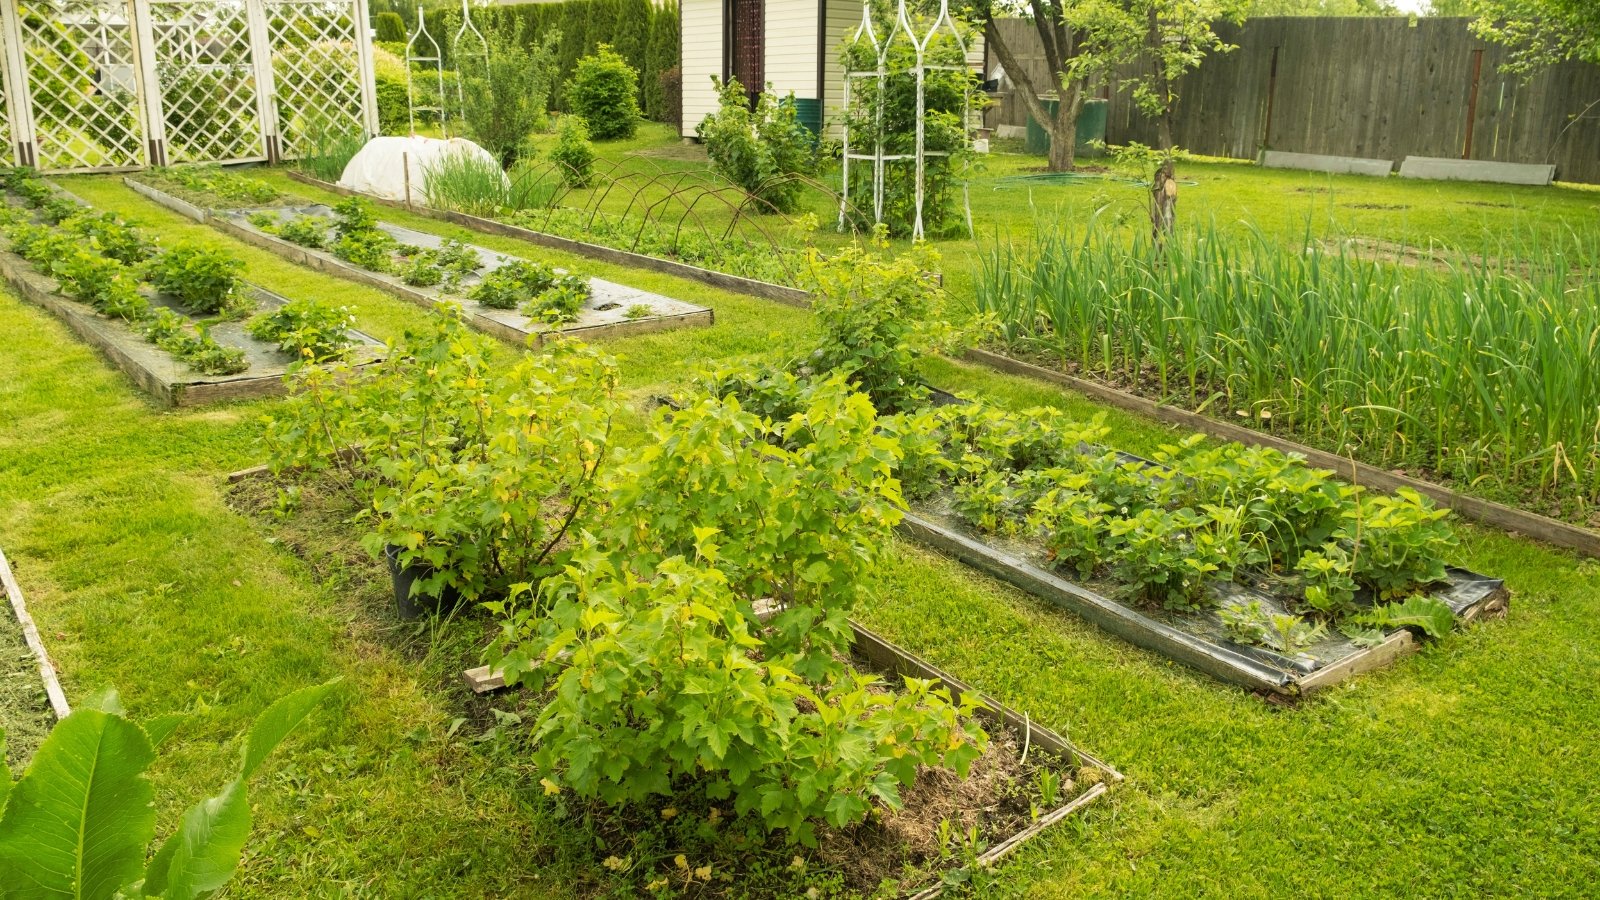 A well-tended vegetable garden with rows of vibrant green plants, promising a bountiful harvest of fresh produce for healthy meals and satisfying culinary adventures.